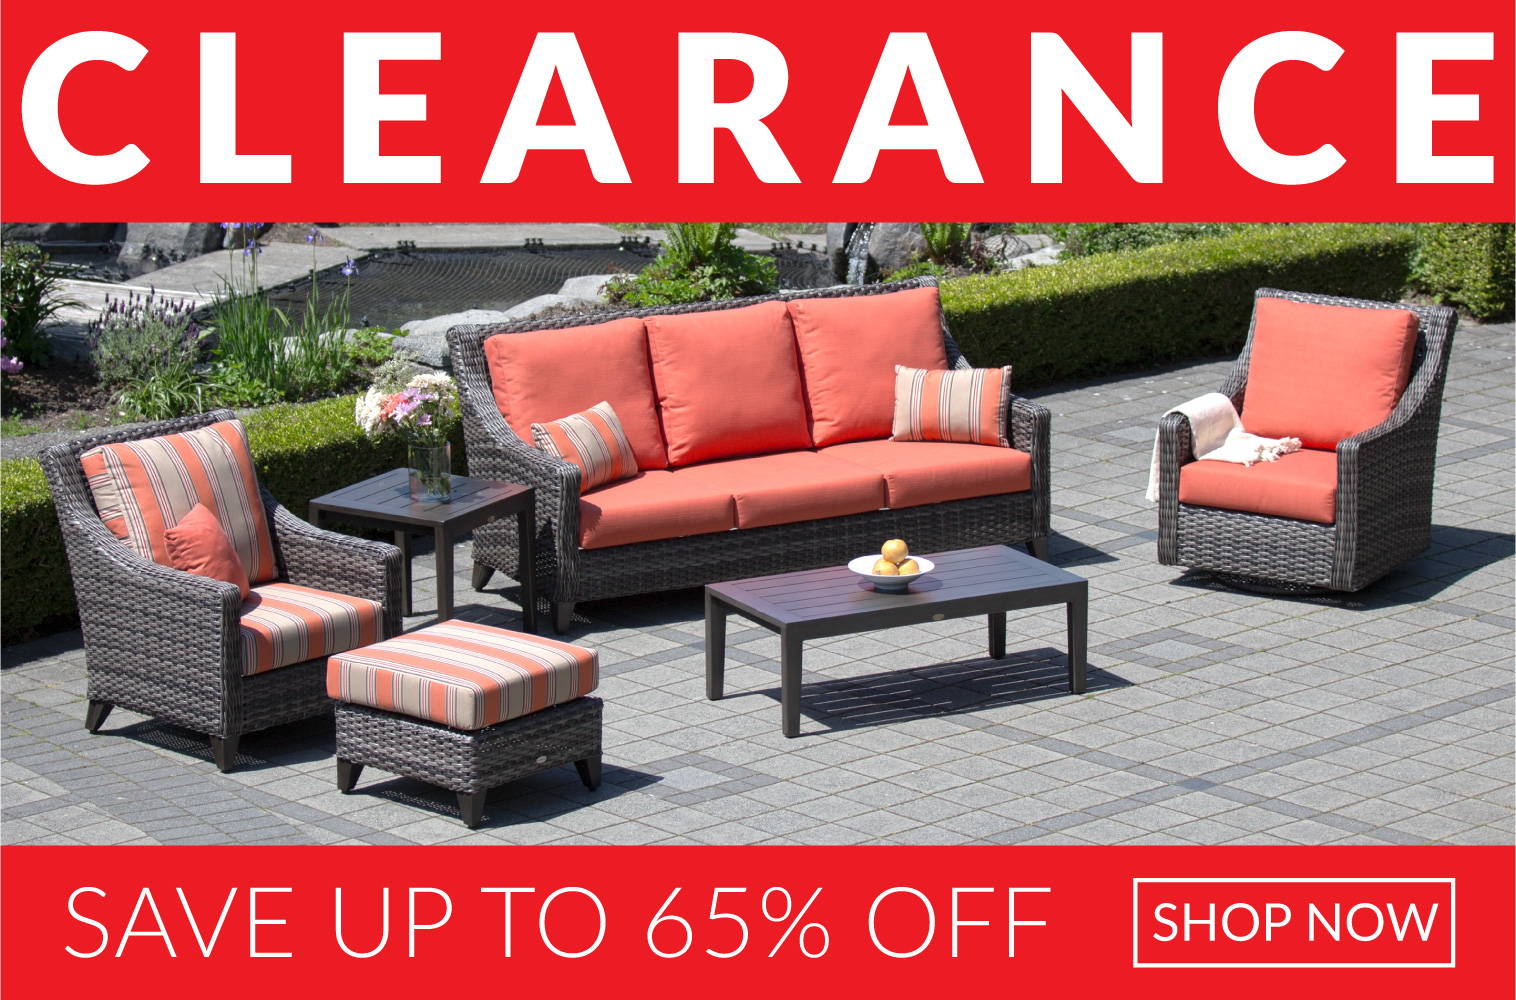 Clearance Sale on St. Martin Outdoor Seating - Save up to 65% off